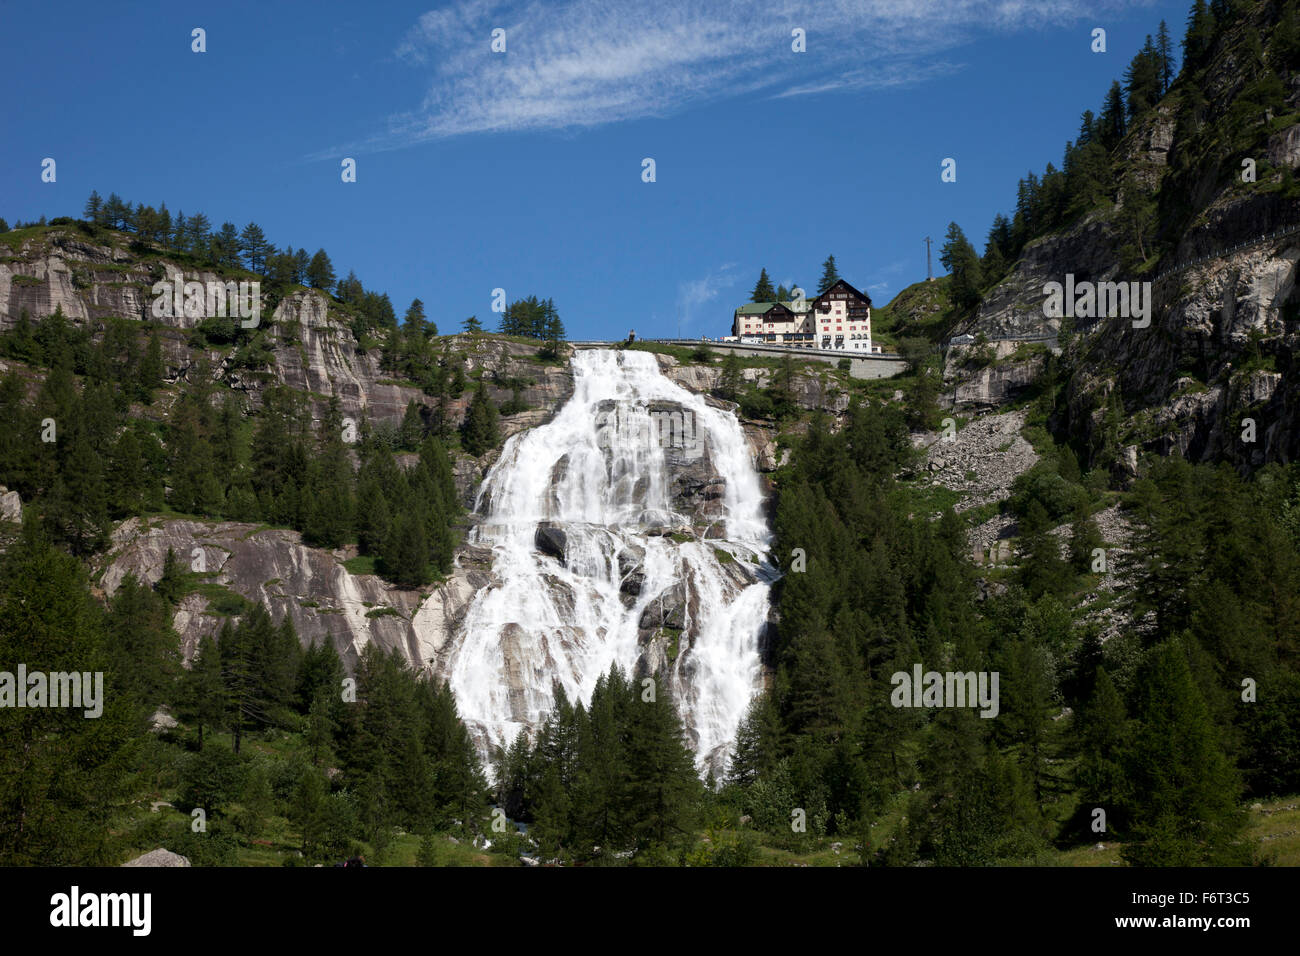 Building over waterfall on remote hillside Stock Photo